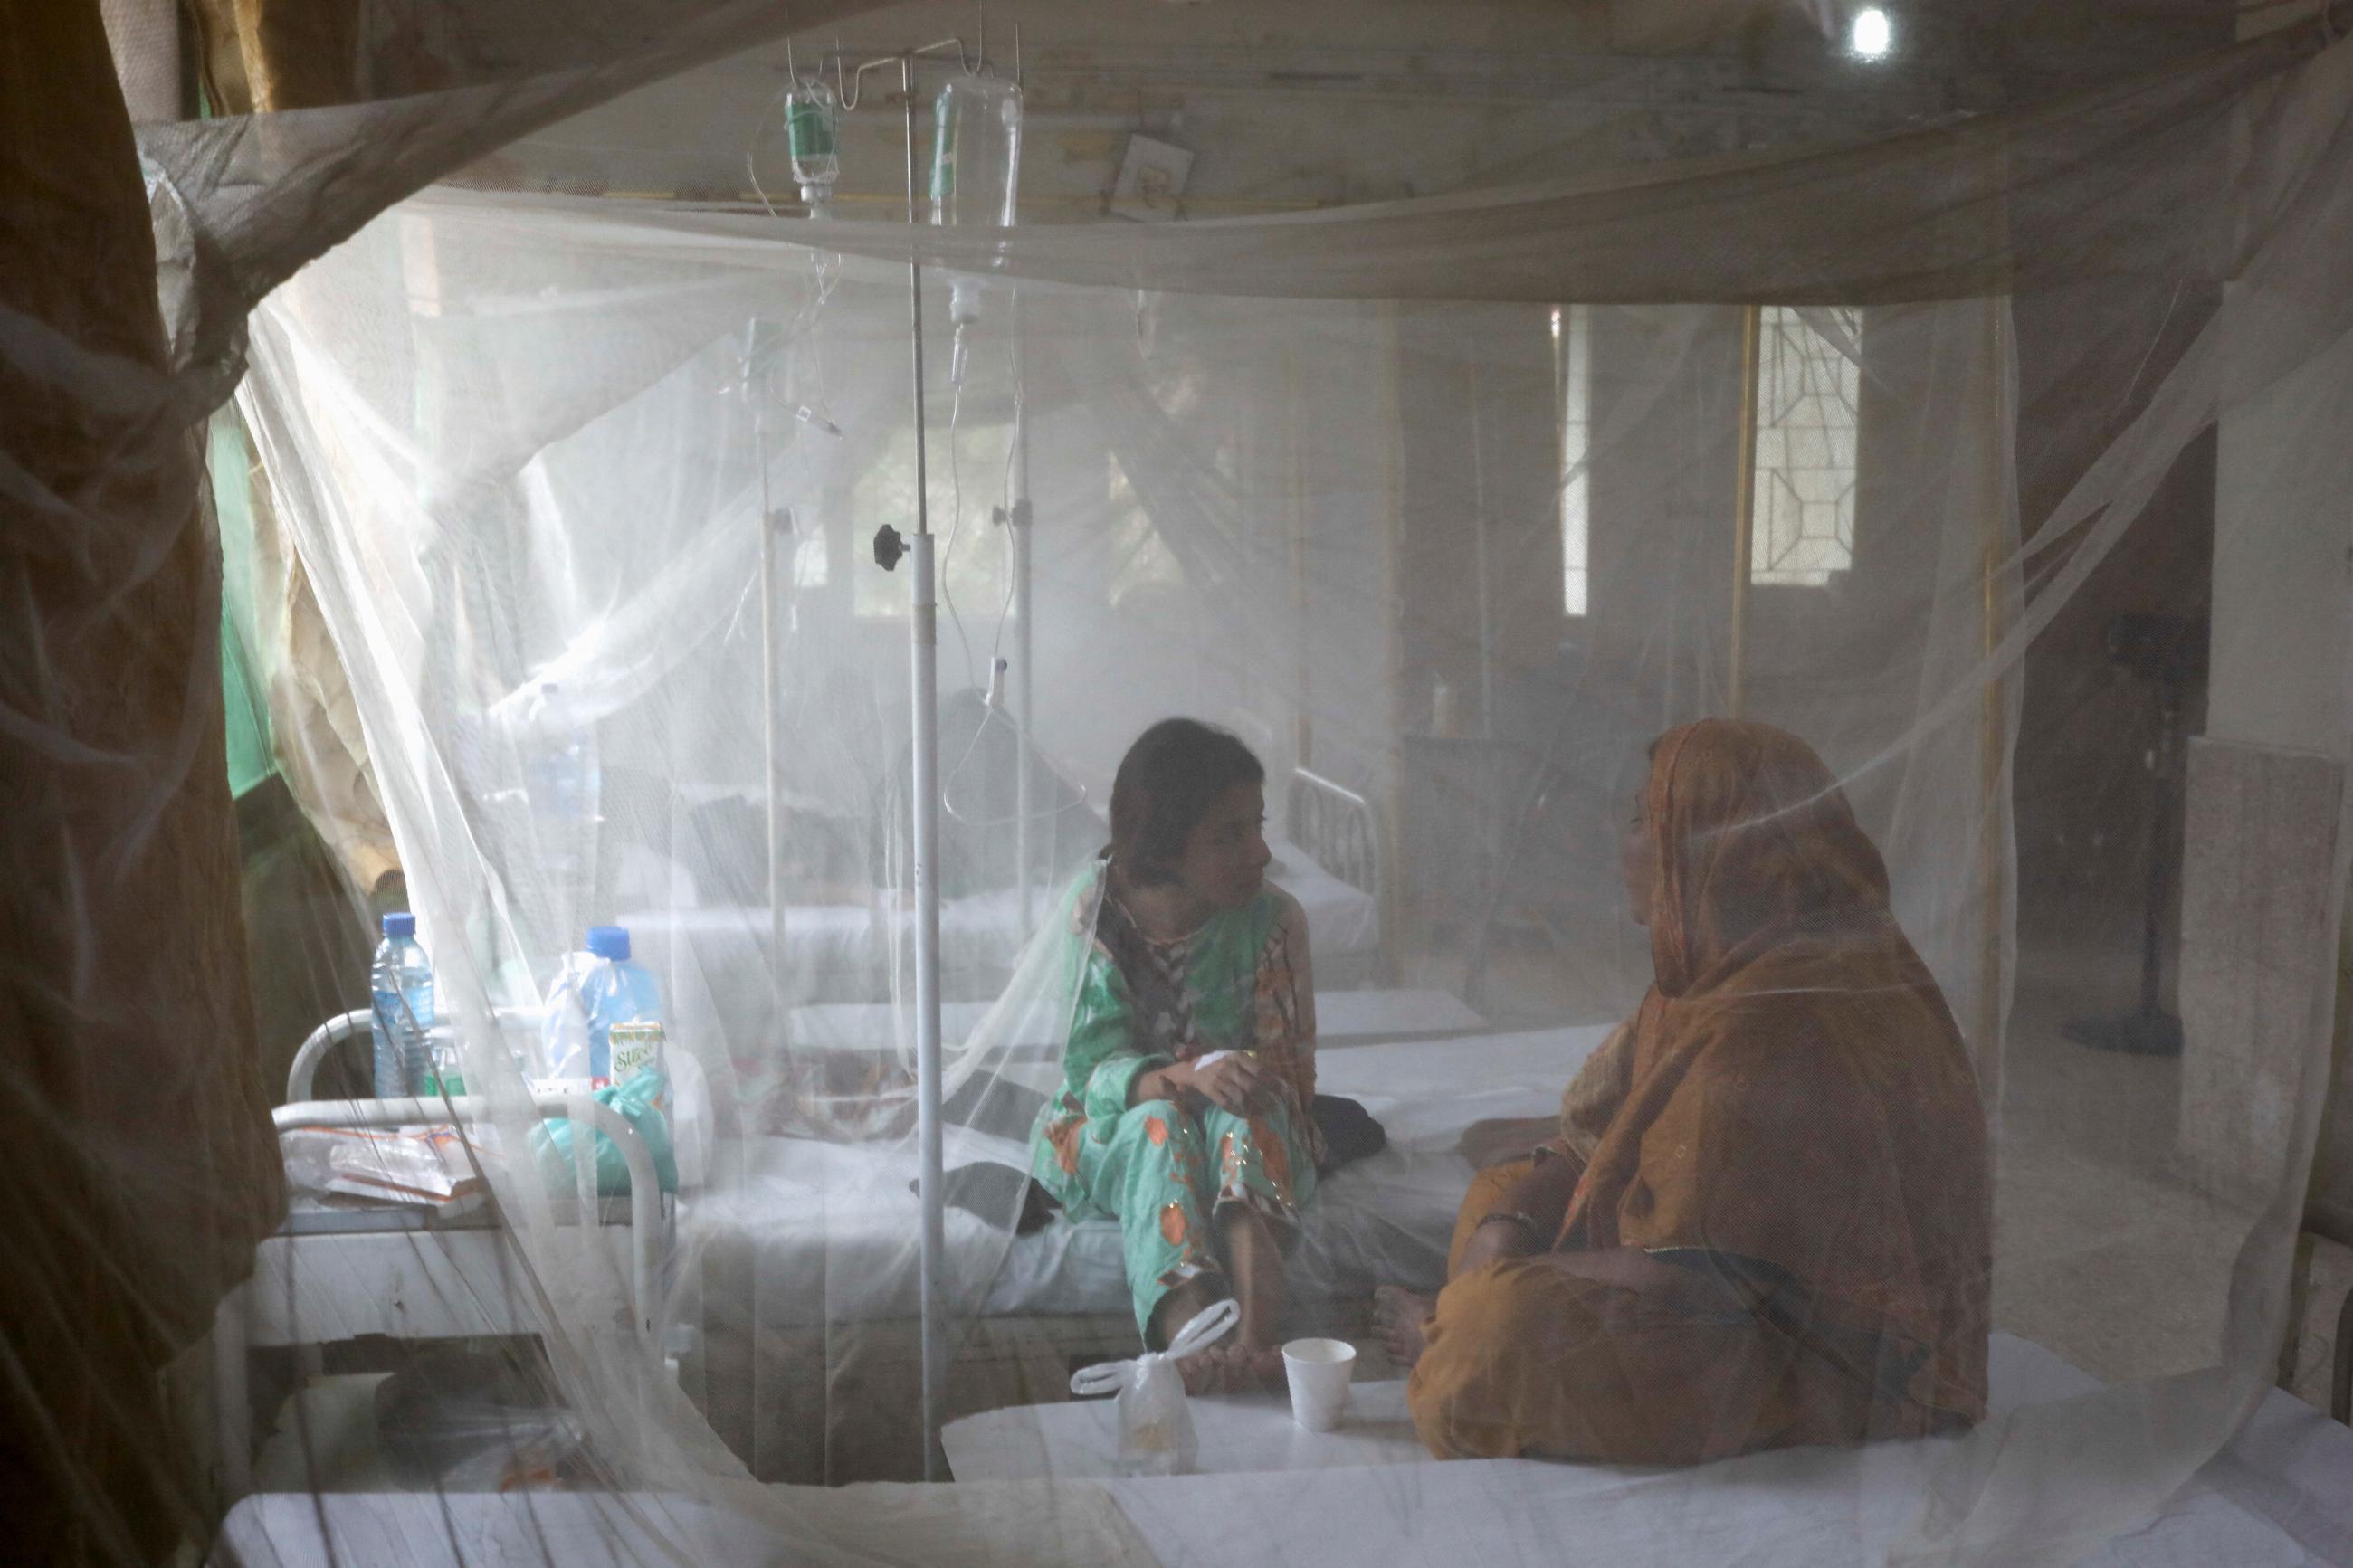 A patient suffering from dengue fever chats with a woman while sitting under a mosquito net.